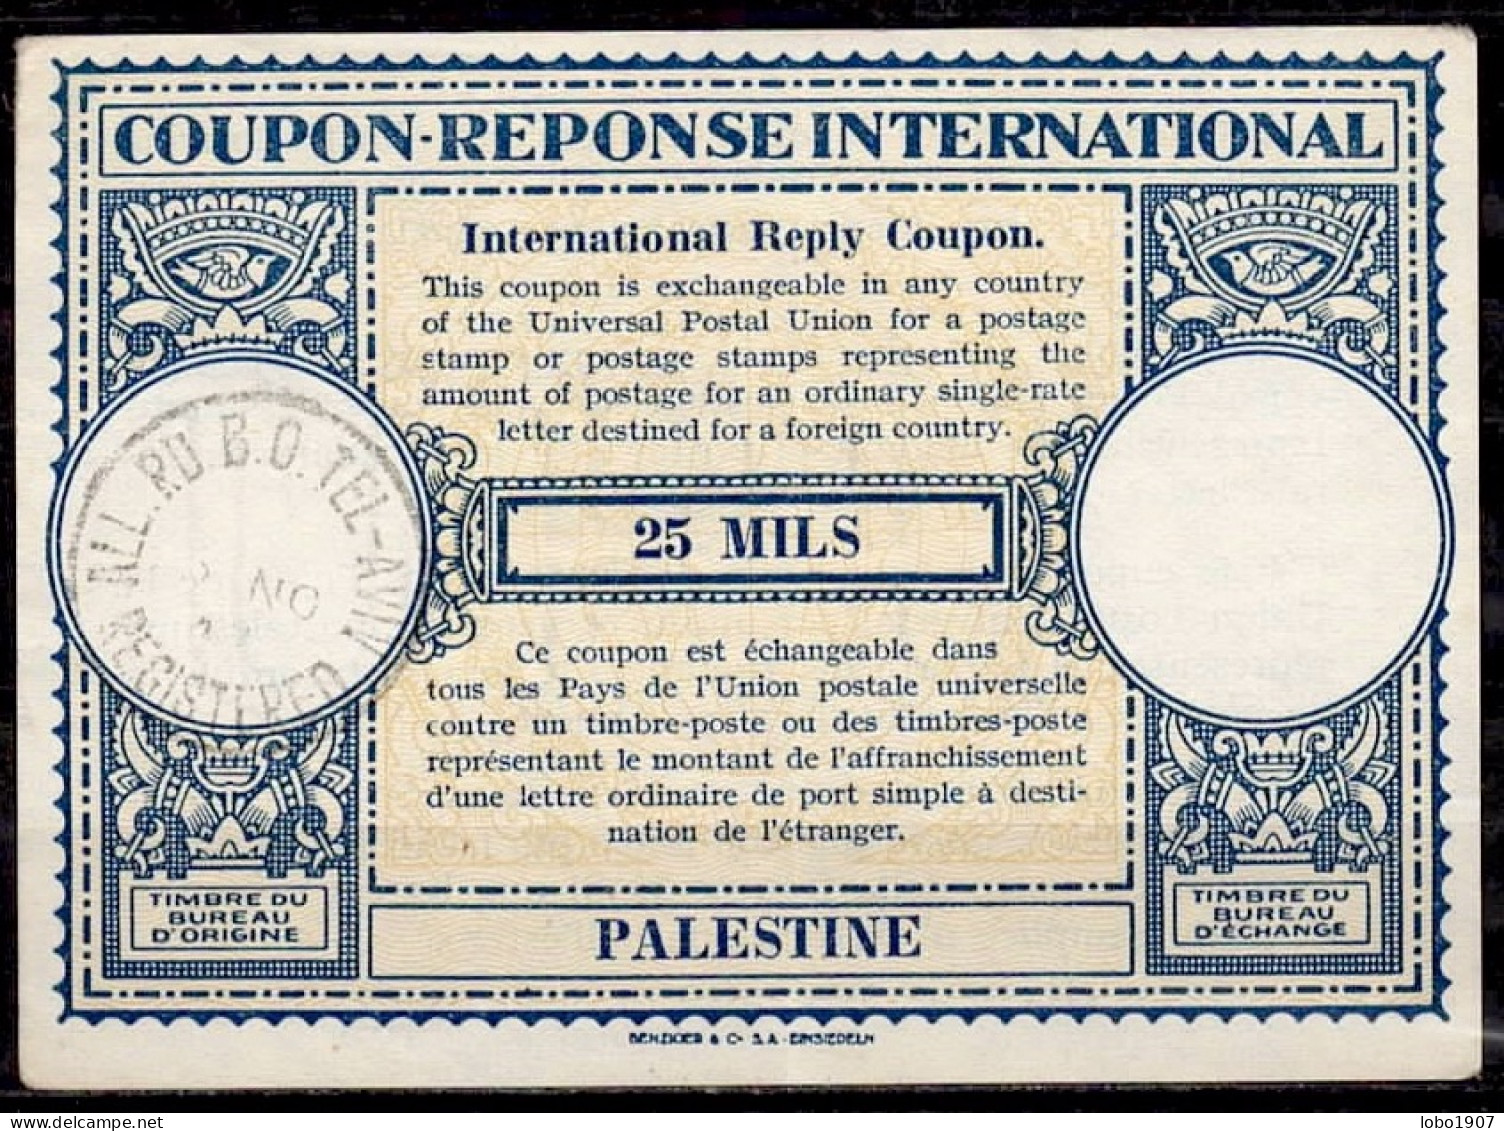 PALESTINE 1946  Lo14o  25 MILS  International Reply Coupon Reponse Antwortschein IRC IAS   T.A. ALL ROAD  KOCH No. 13 - Palestine